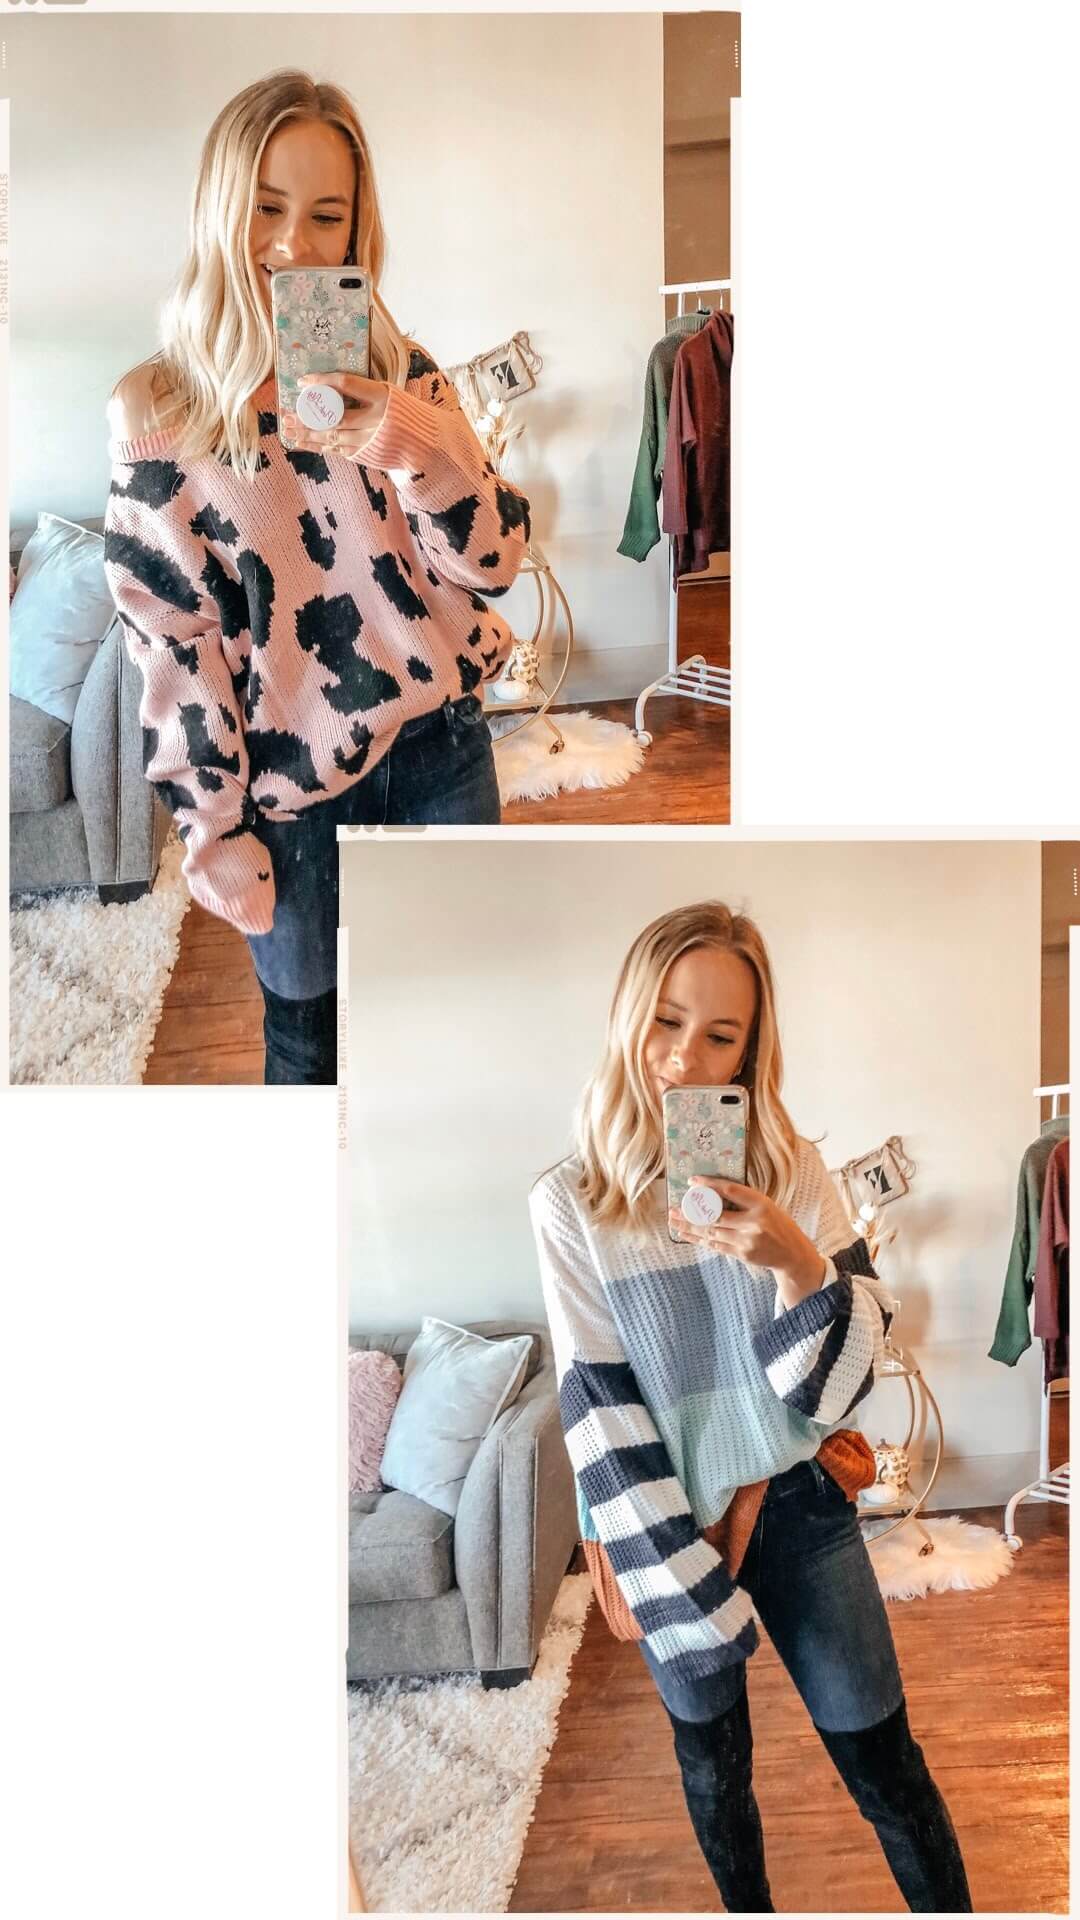 Amazon Sweaters Under $30. Amazon Haul with sweaters under $30. Amazon Fashion Finds. The Blonder Life